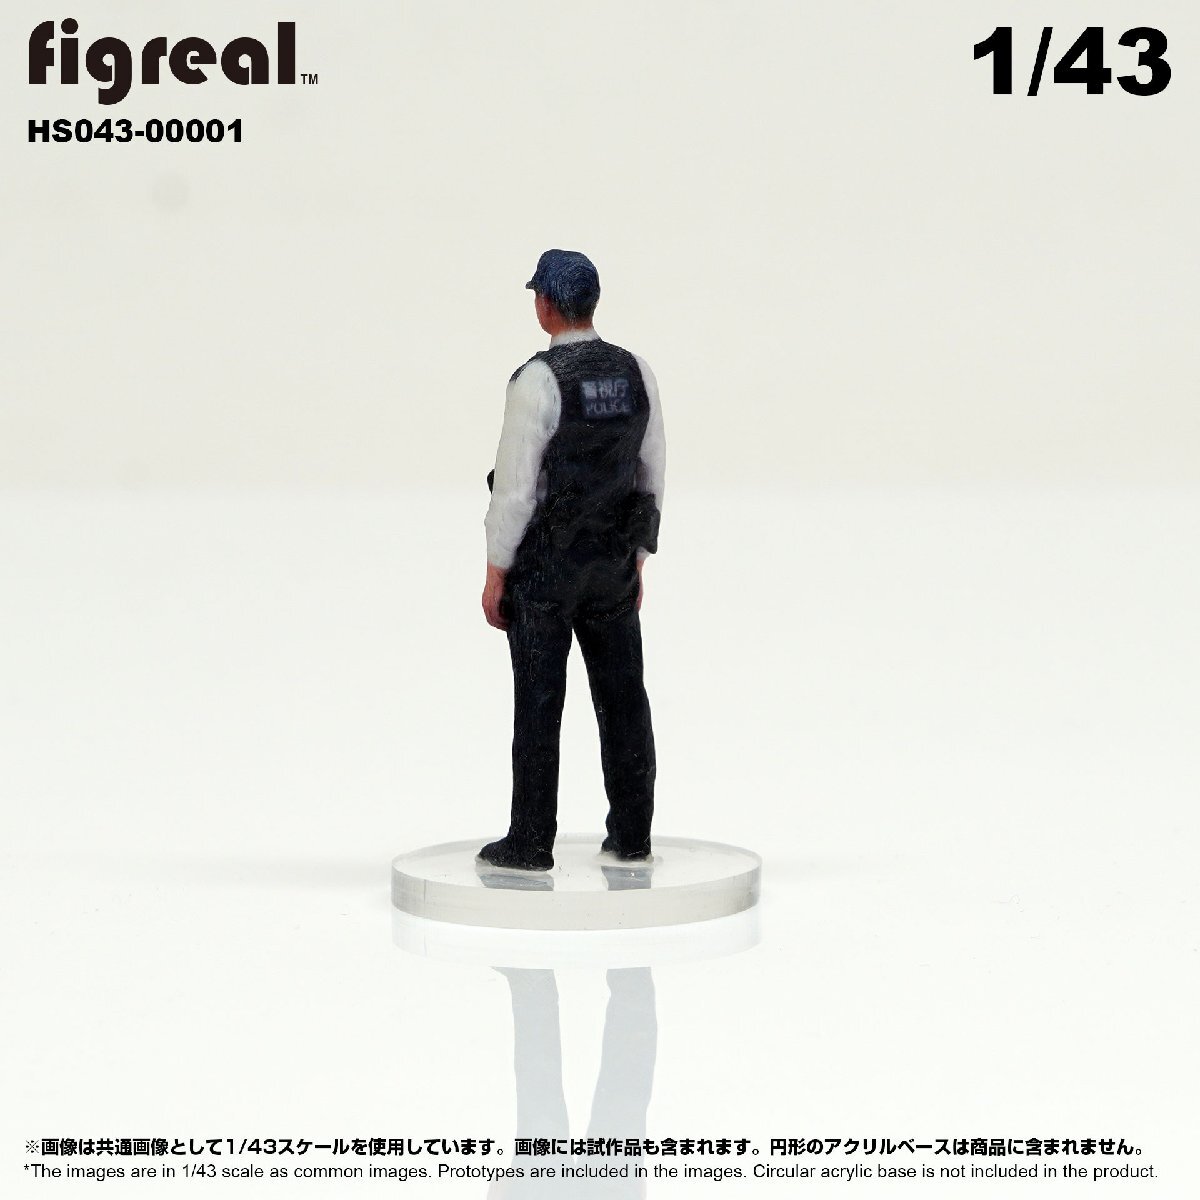 HS043-00001 figreal 日本警察官 1/43 高精細フィギュア_画像4